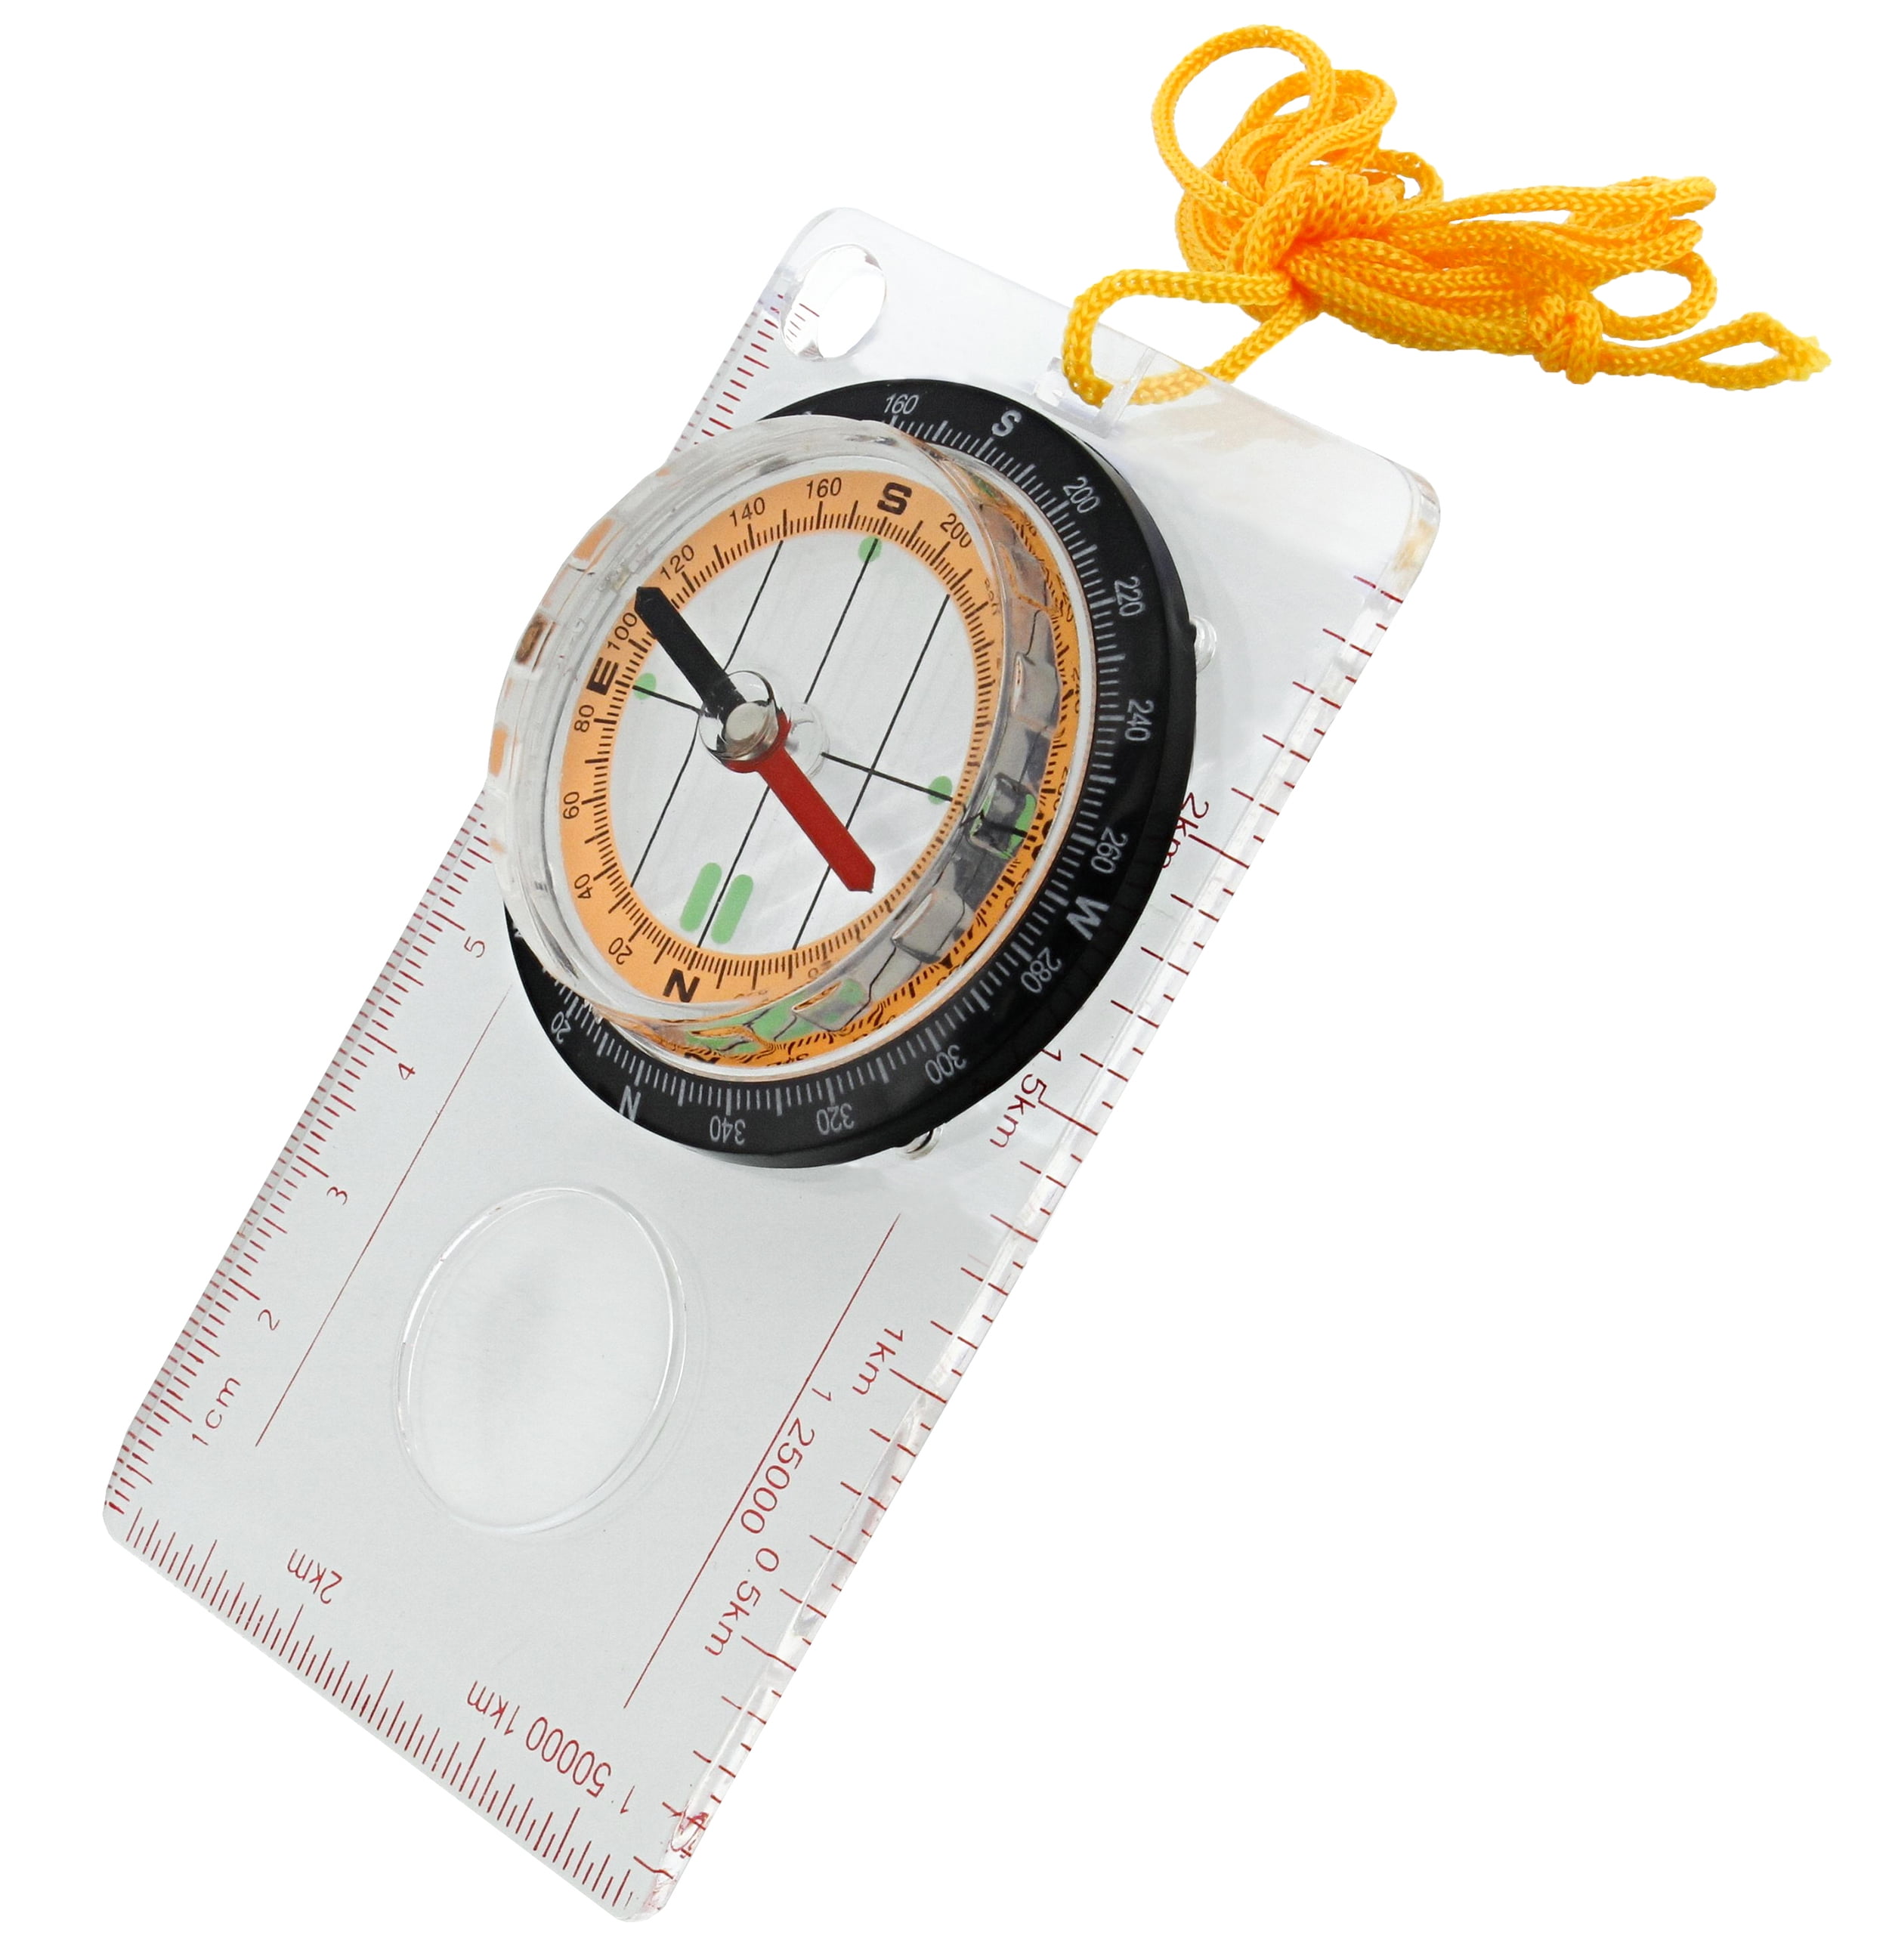 Portable Mini Thumb Compass w/ Map Scale for Hunting Orienteering Hiking UK 